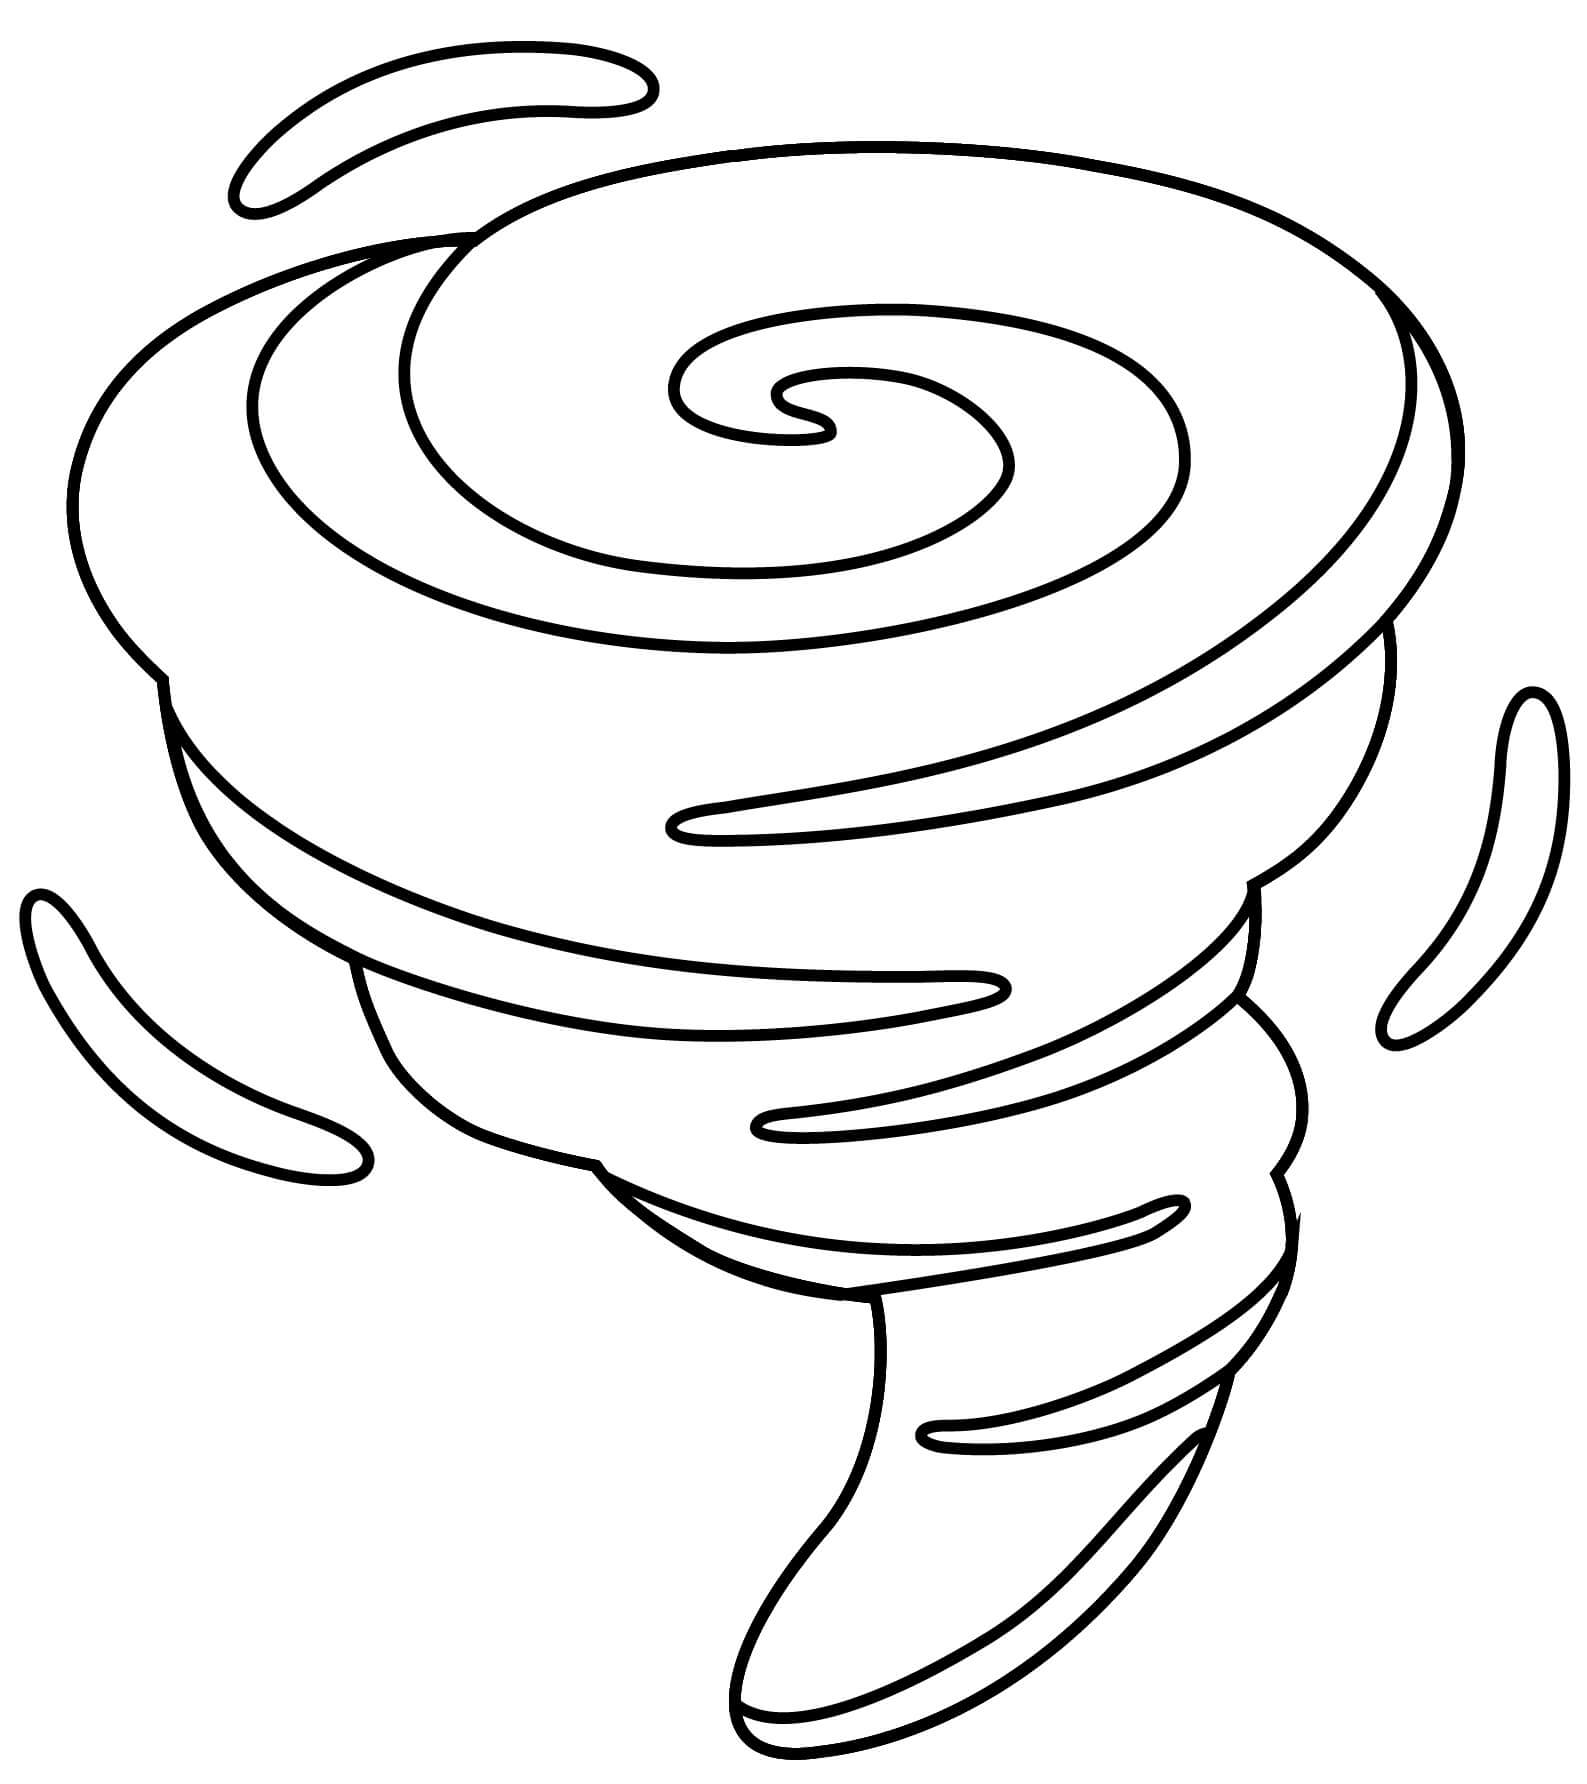 Tornade 8 coloring page